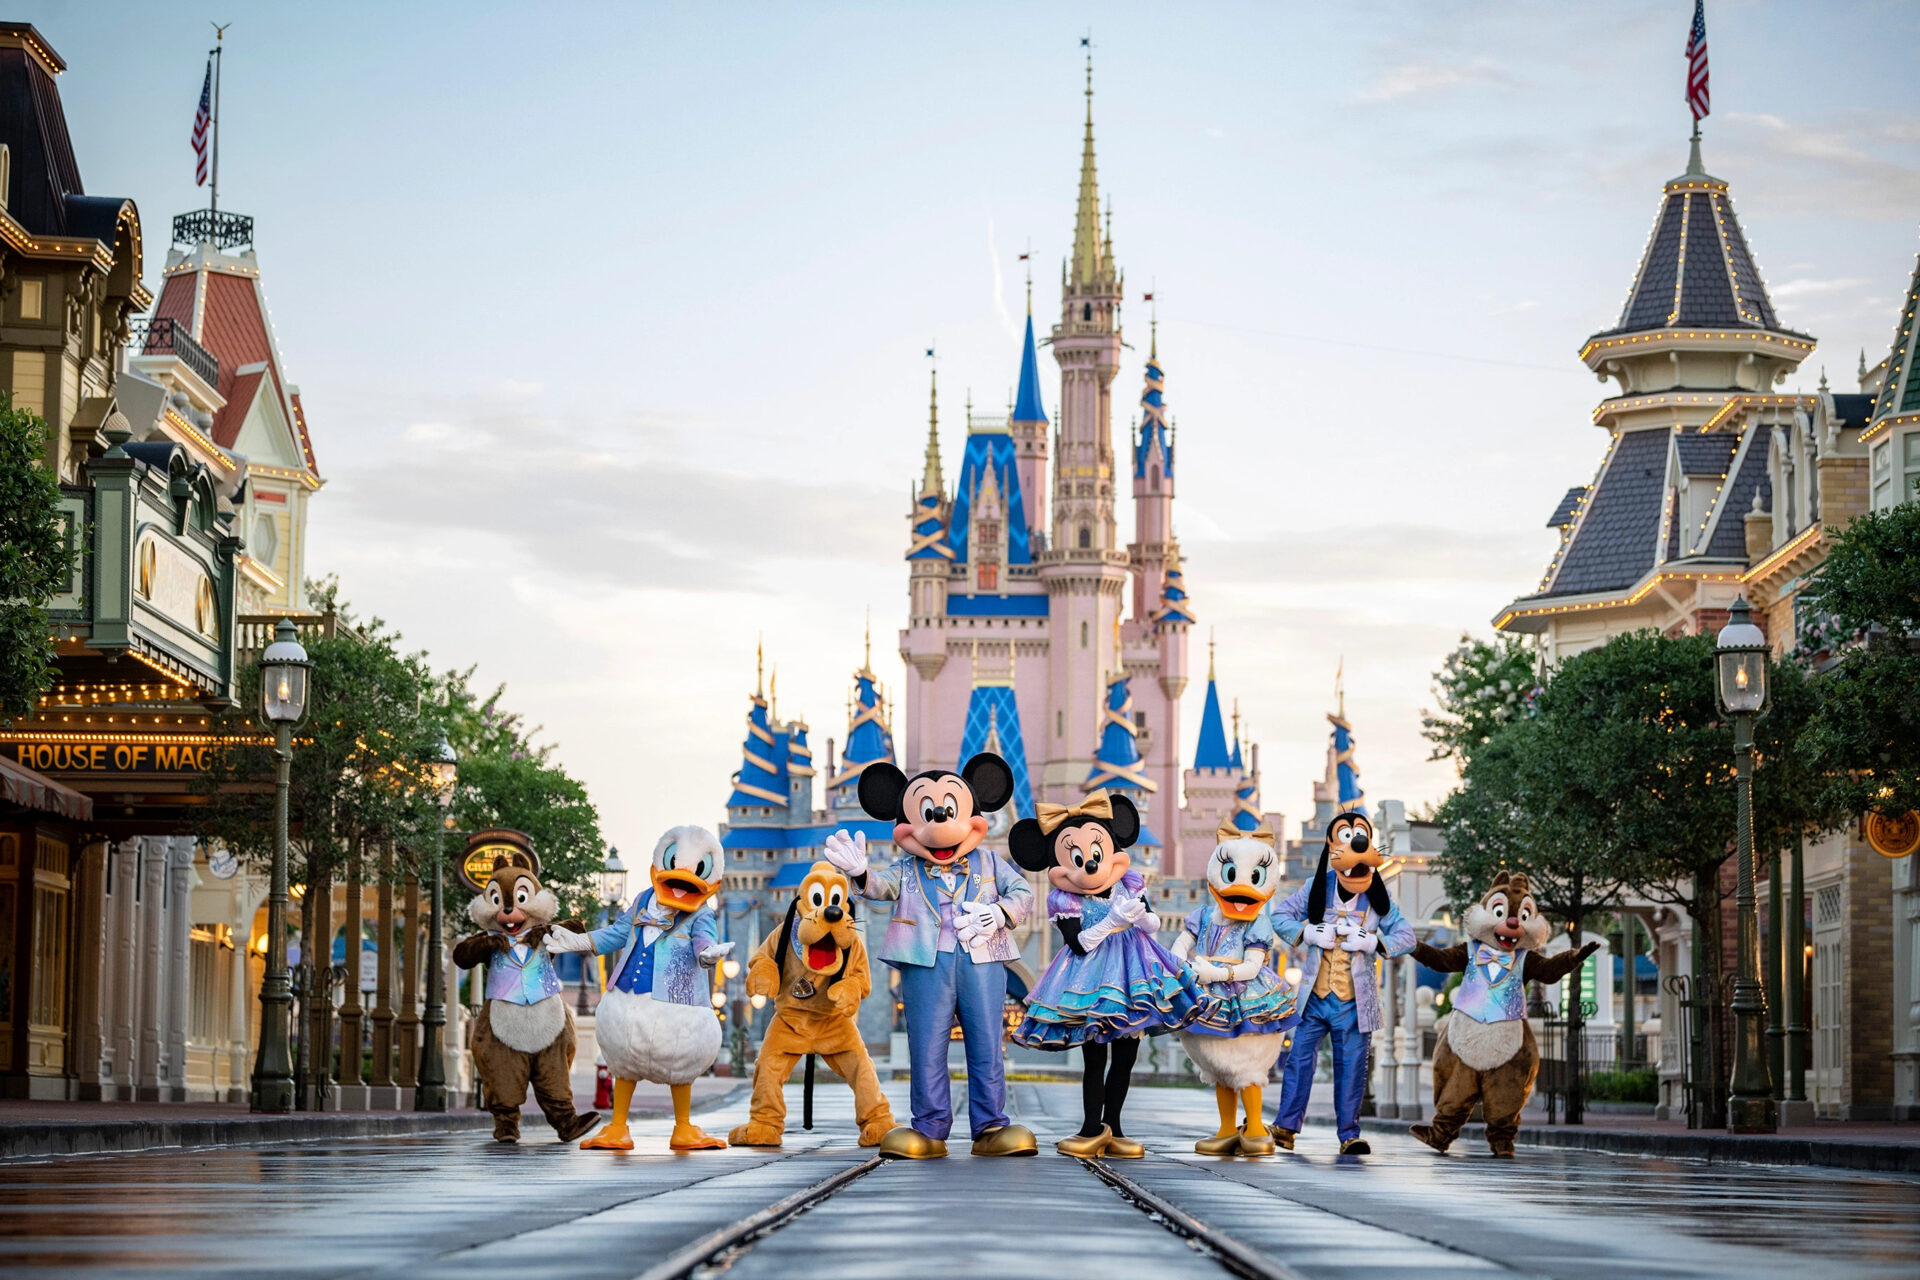 Check out the secret Disney vacations available to a few!